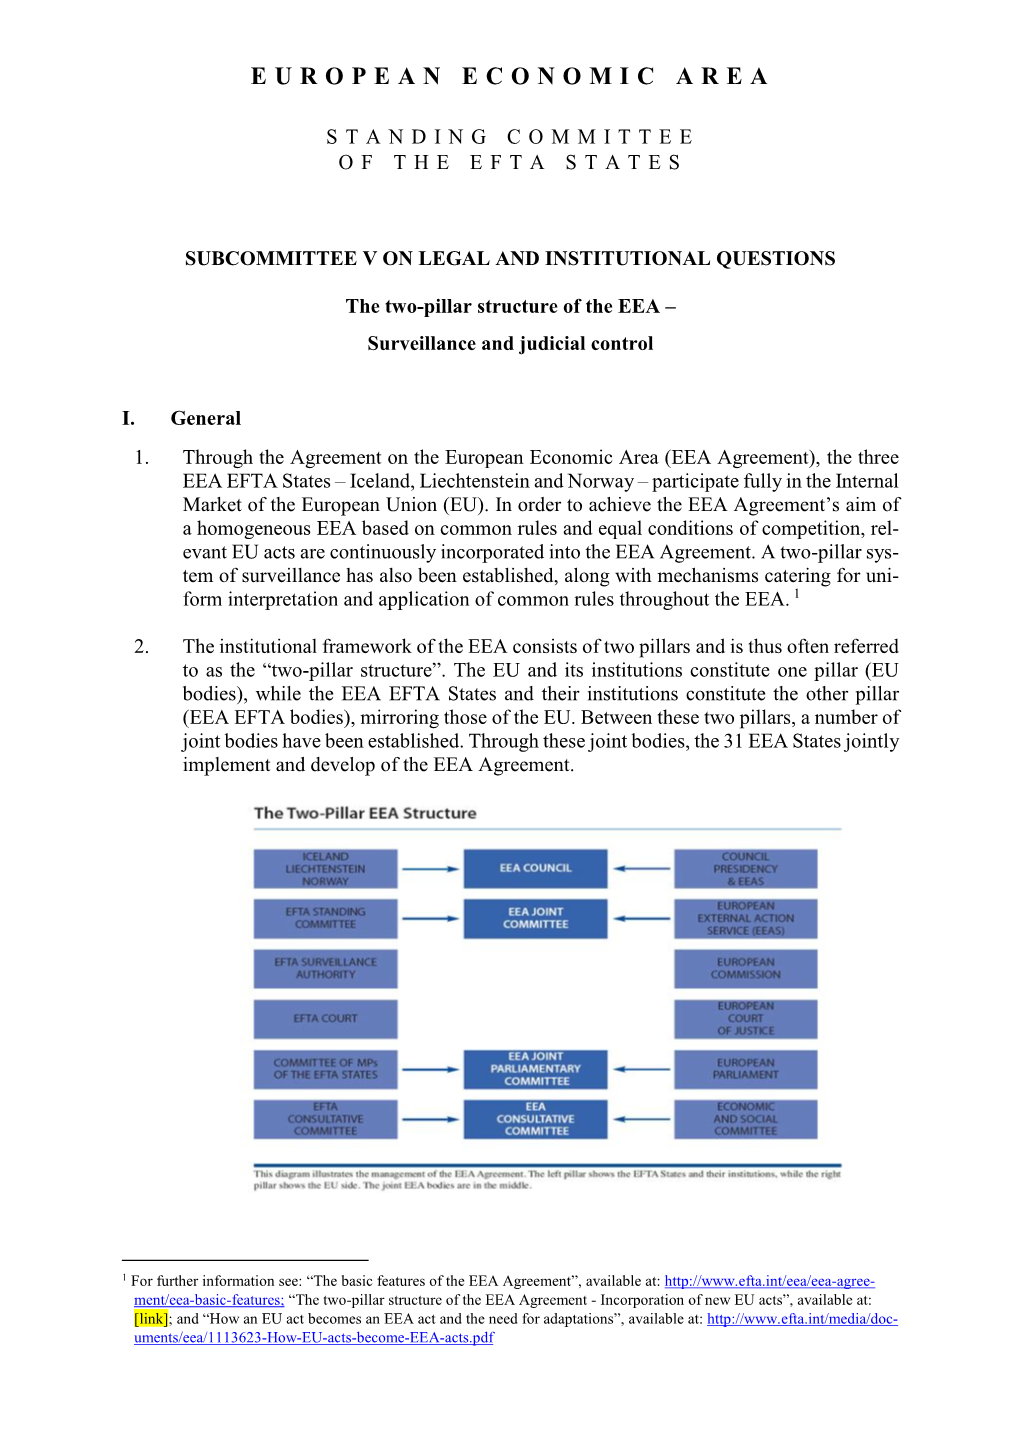 The Two-Pillar Structure of the EEA: Surveillance and Judicial Control